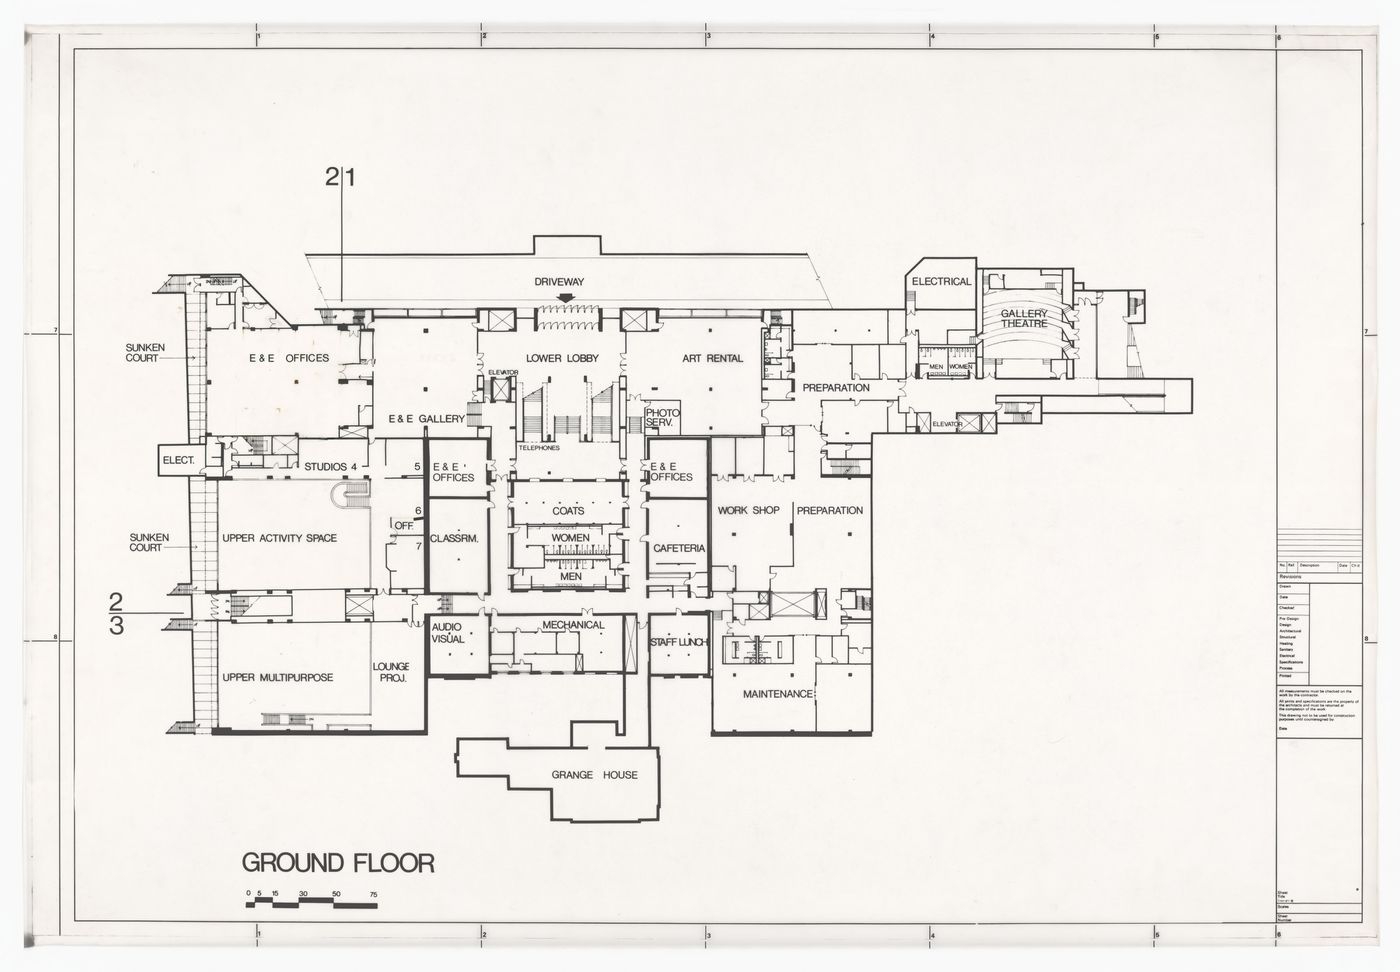 Ground floor plan for Art Gallery of Ontario, Stage II Expansion, Toronto